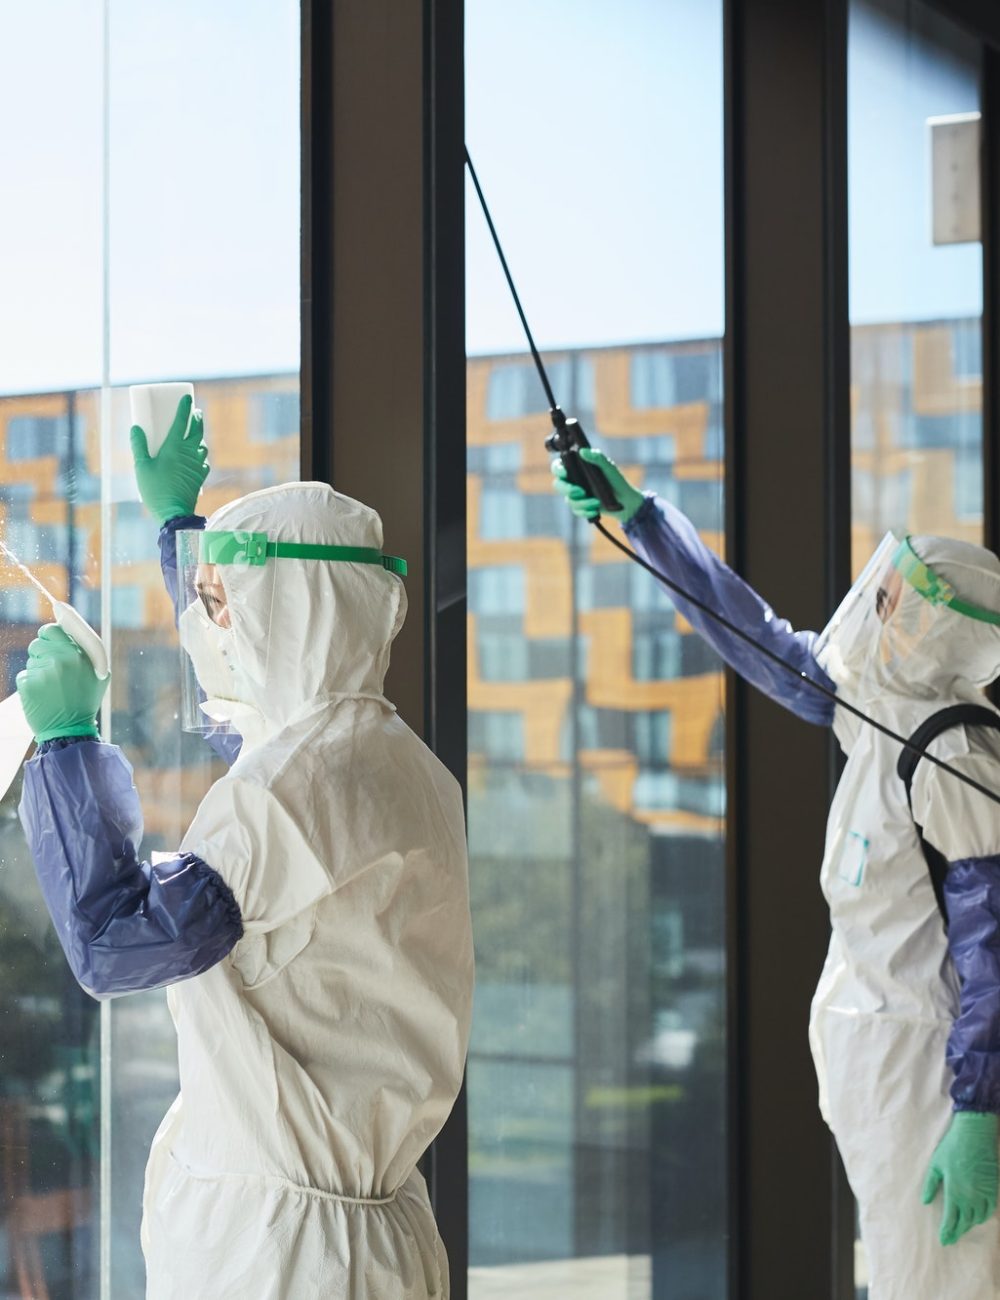 Cleaning Workers Disinfecting Windows in Office